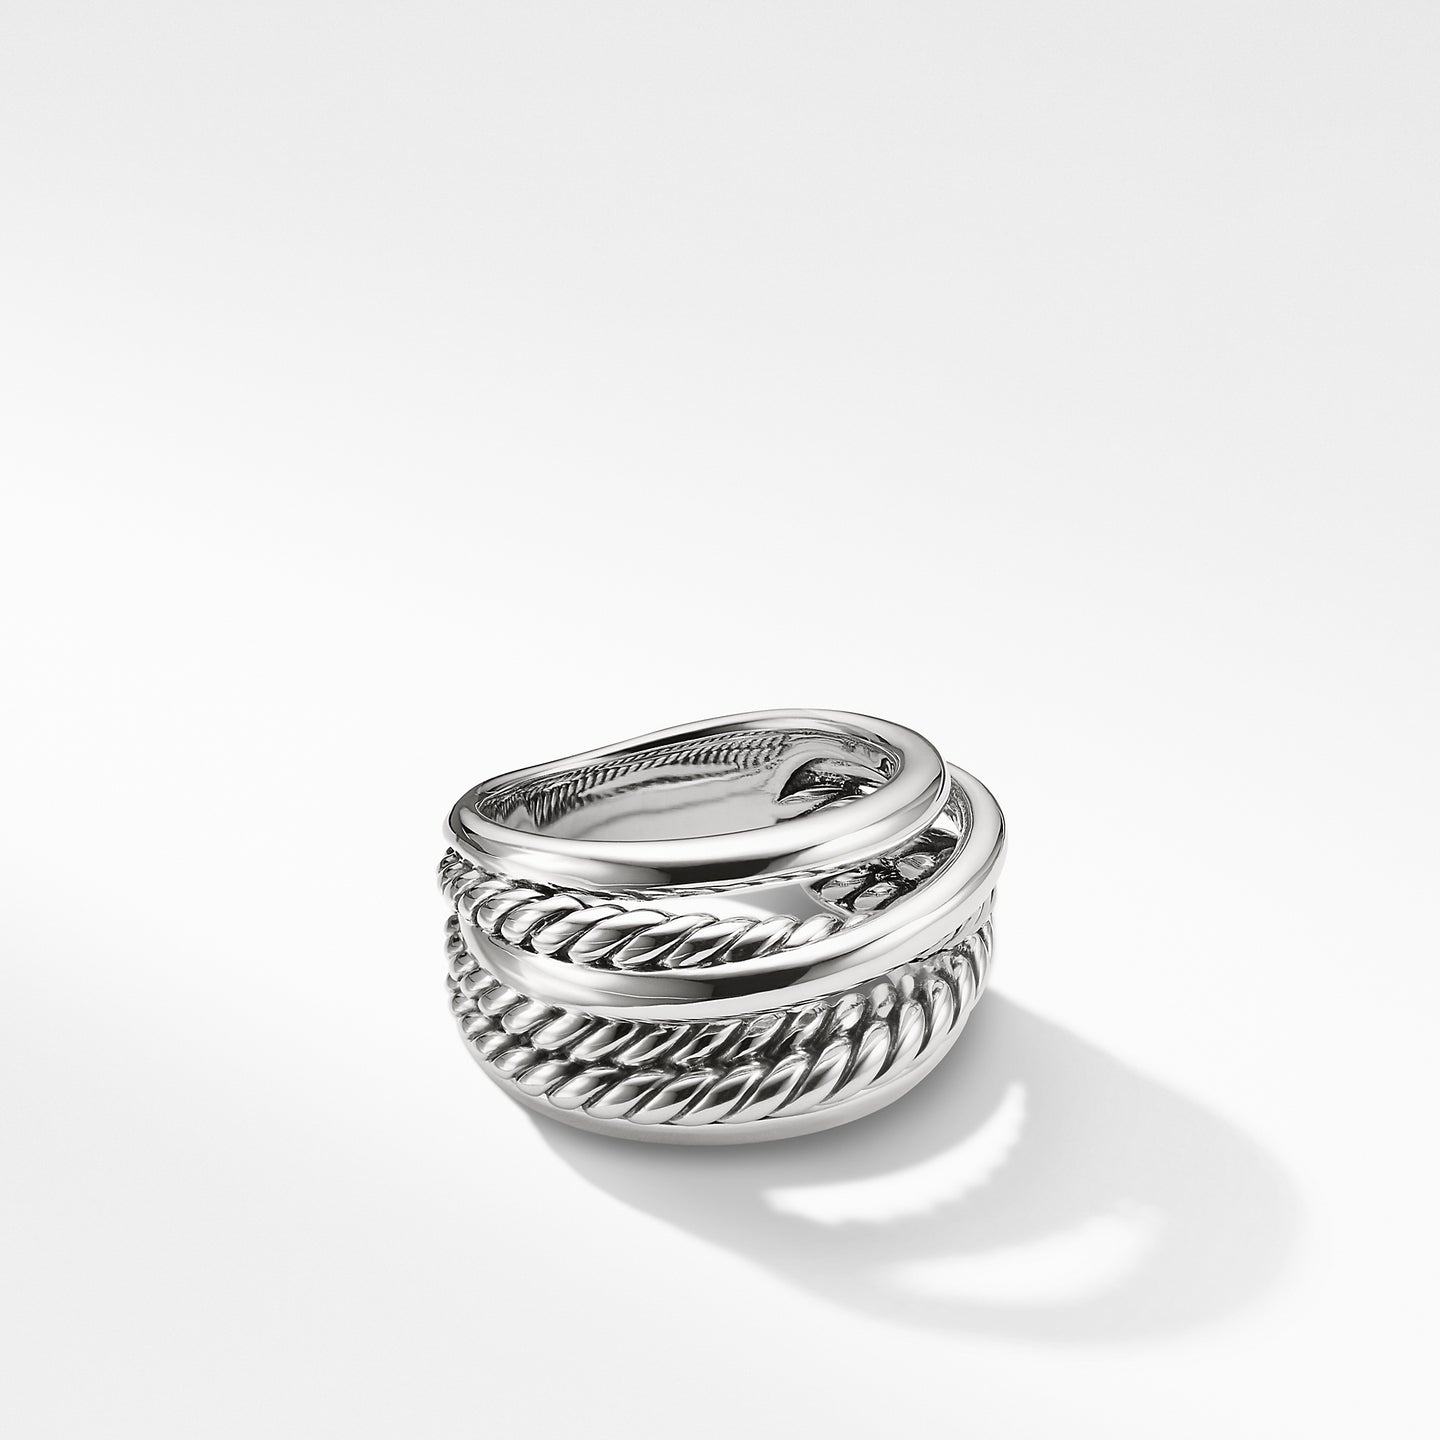 David Yurman The Crossover® Collection Ring in Sterling Silver